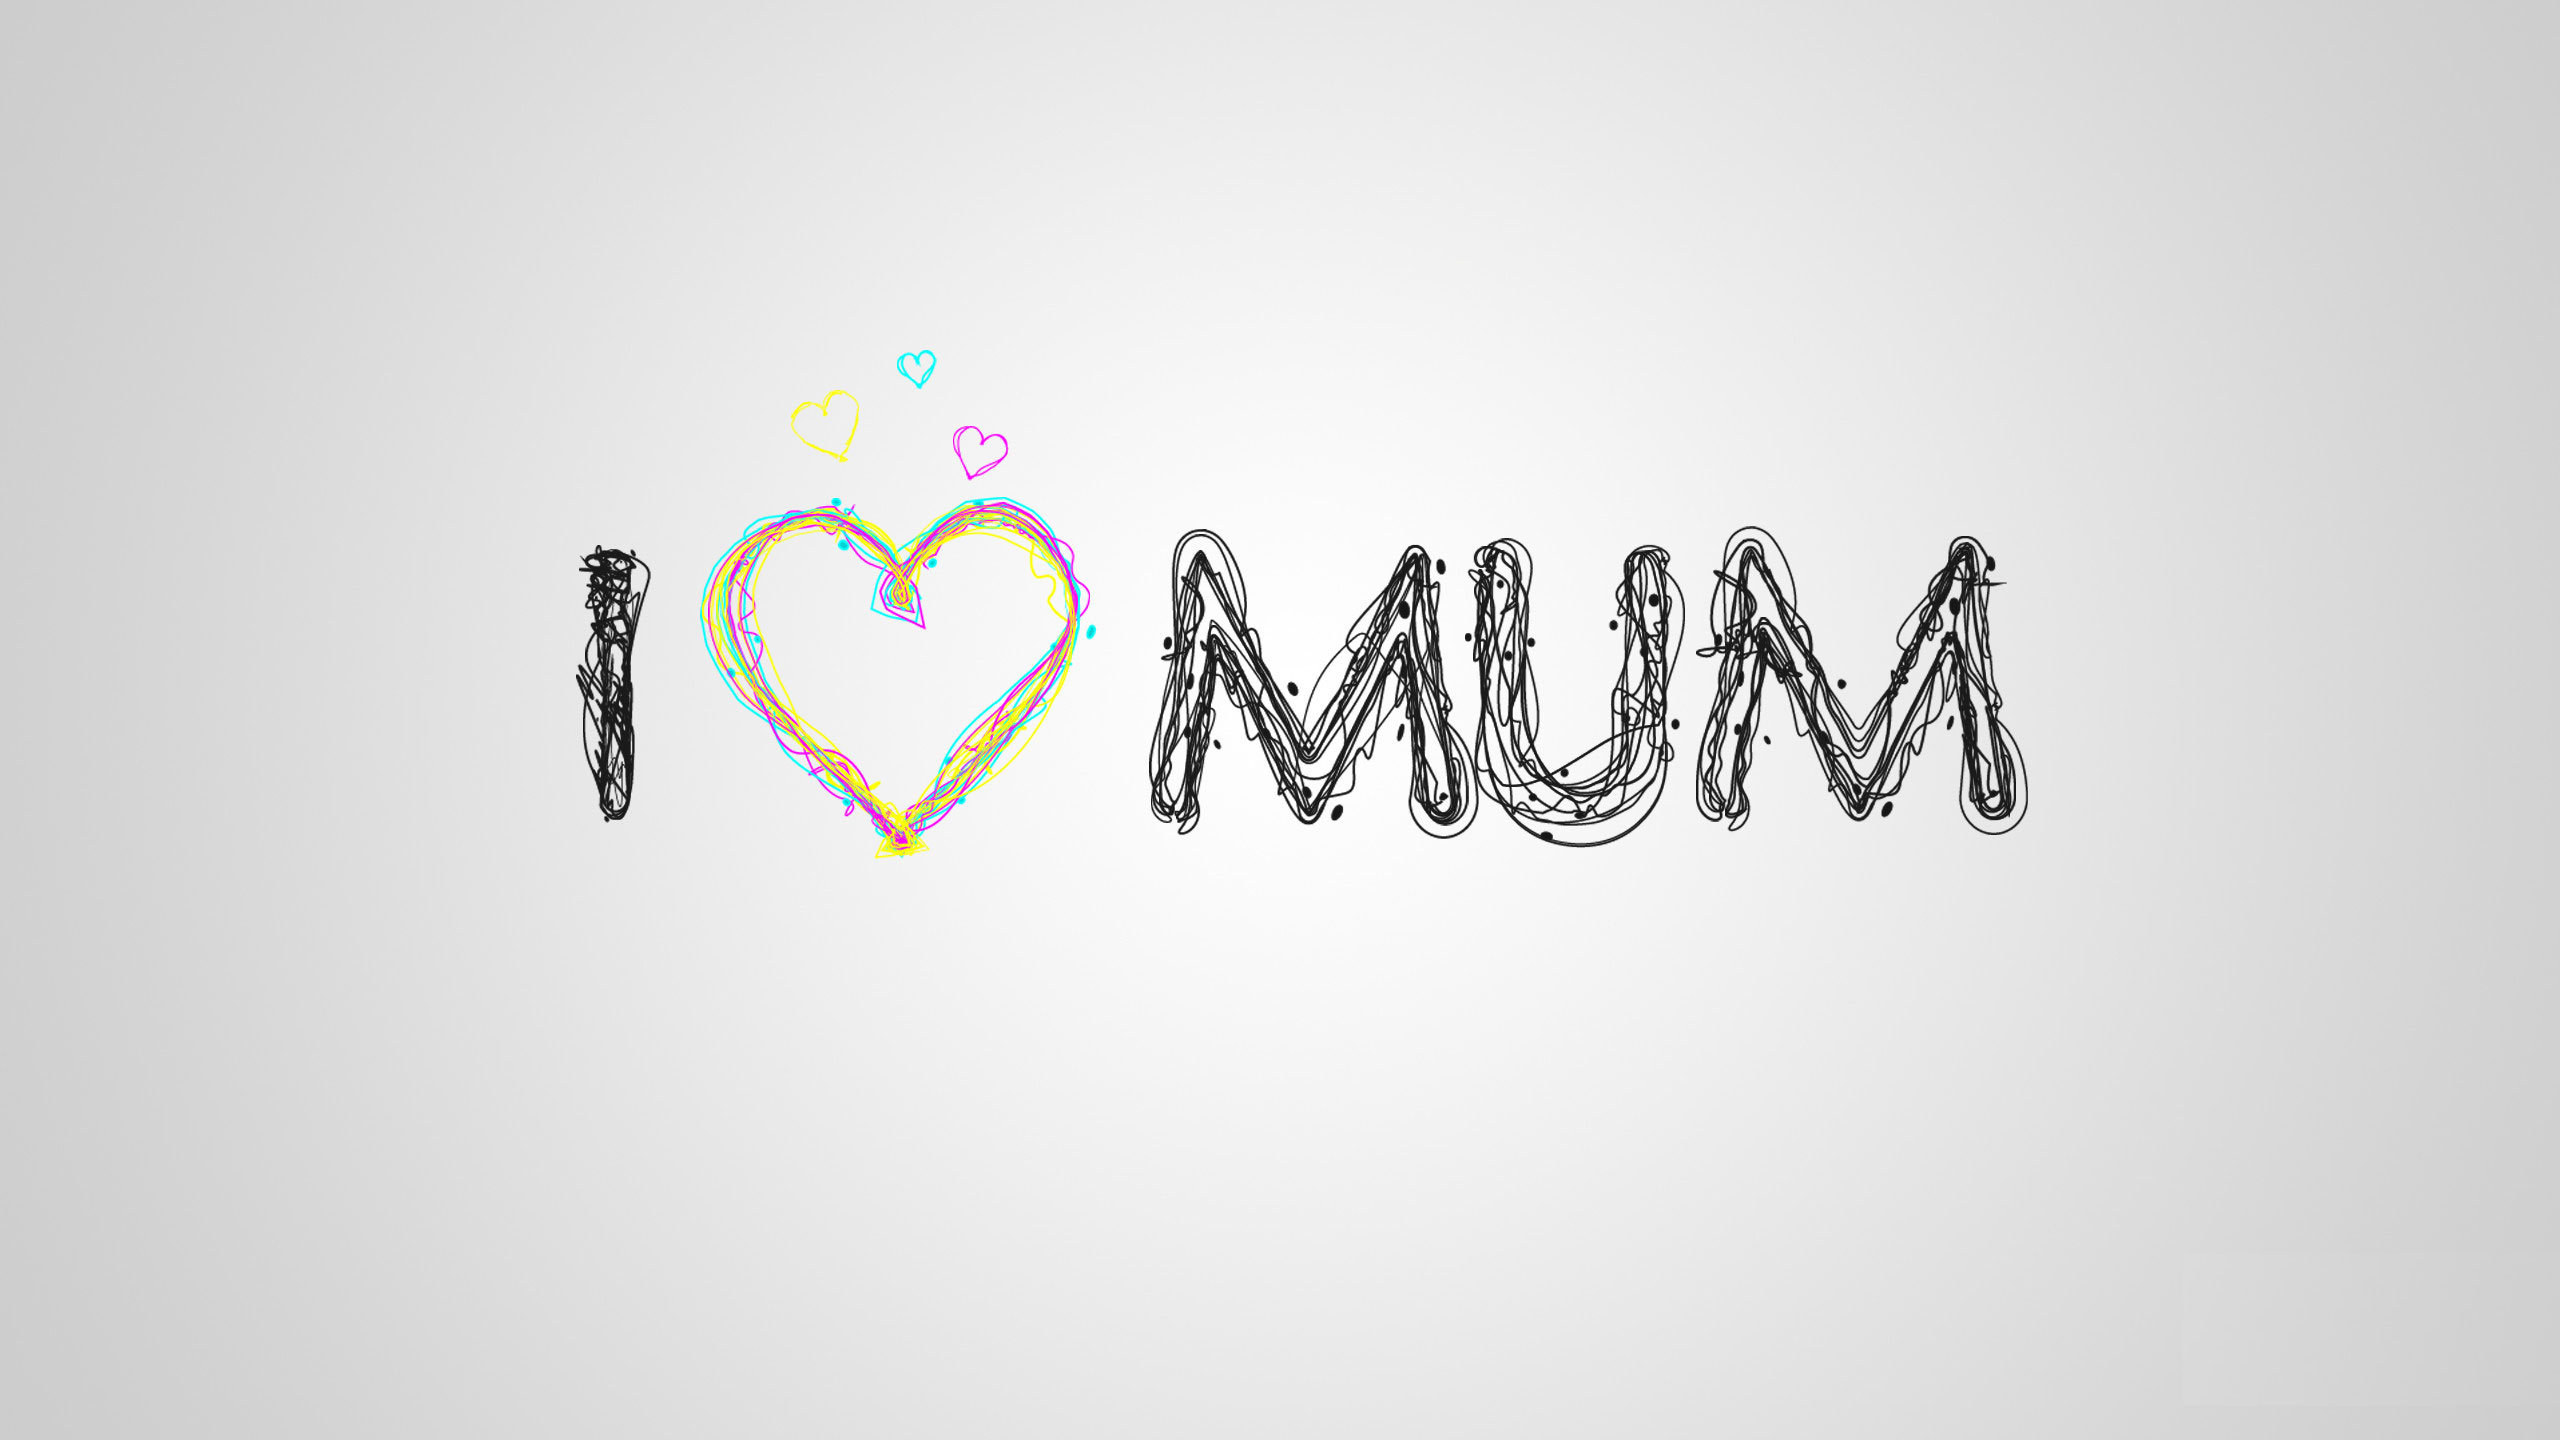 I Love You Mom Wallpapers HD 